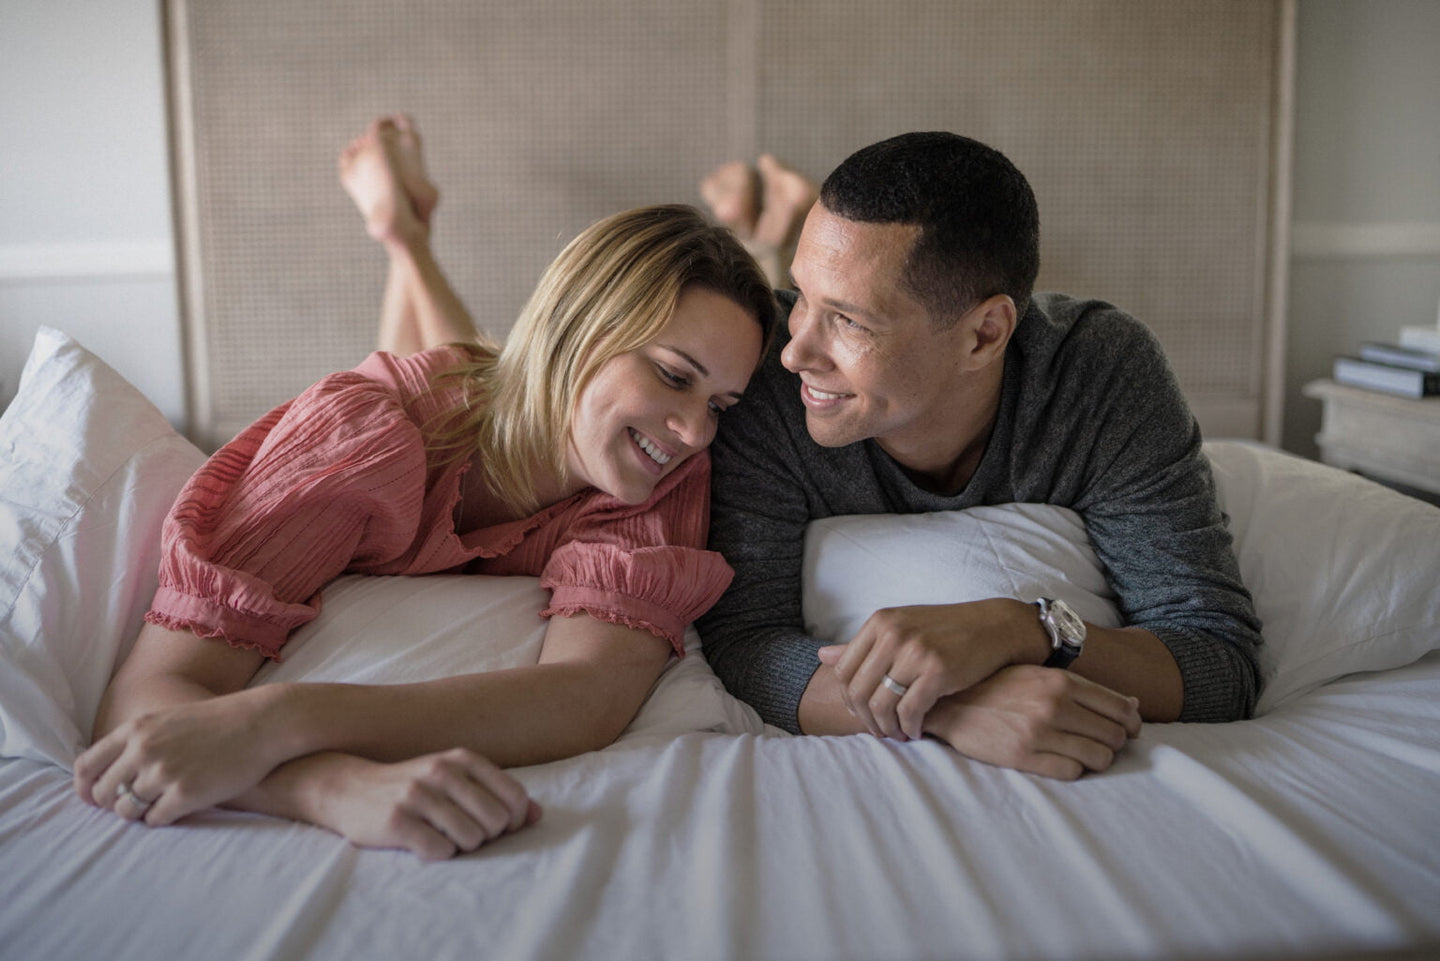 photo of a smiling couple on bed with the feet resting in the headboard. the girl wearing a diamond ring and resting his head on the guy's shoulder wearing a wedding ring and a watch